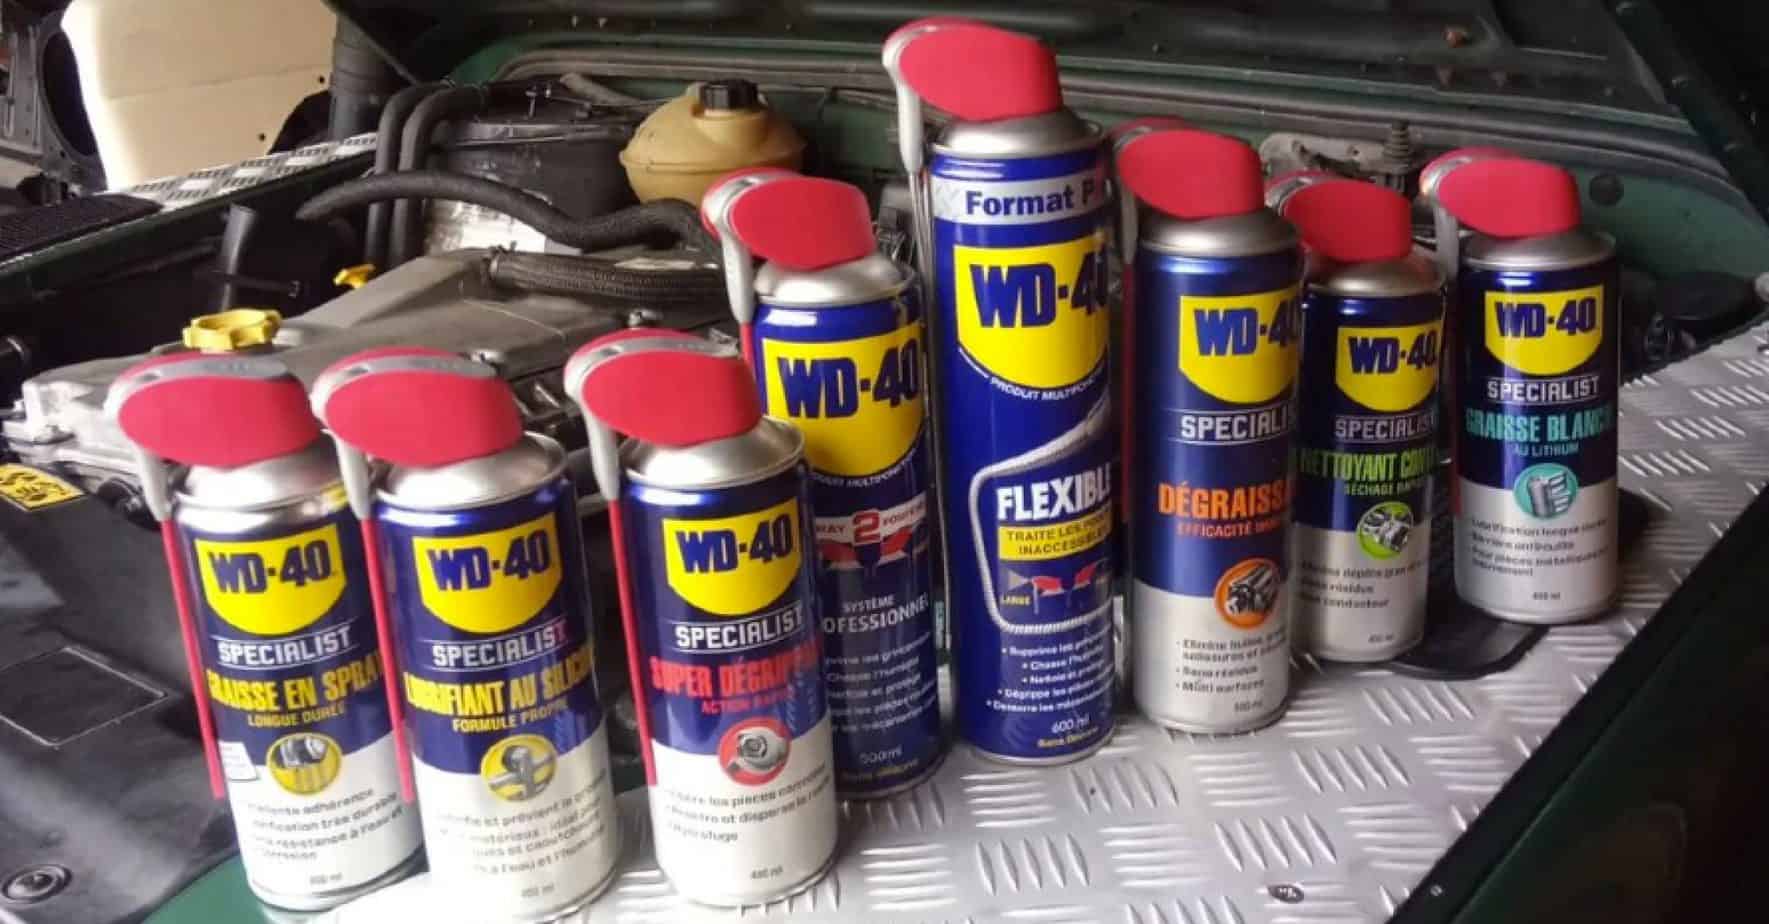 How To Get Rid Of Carpenter Bees Wd40